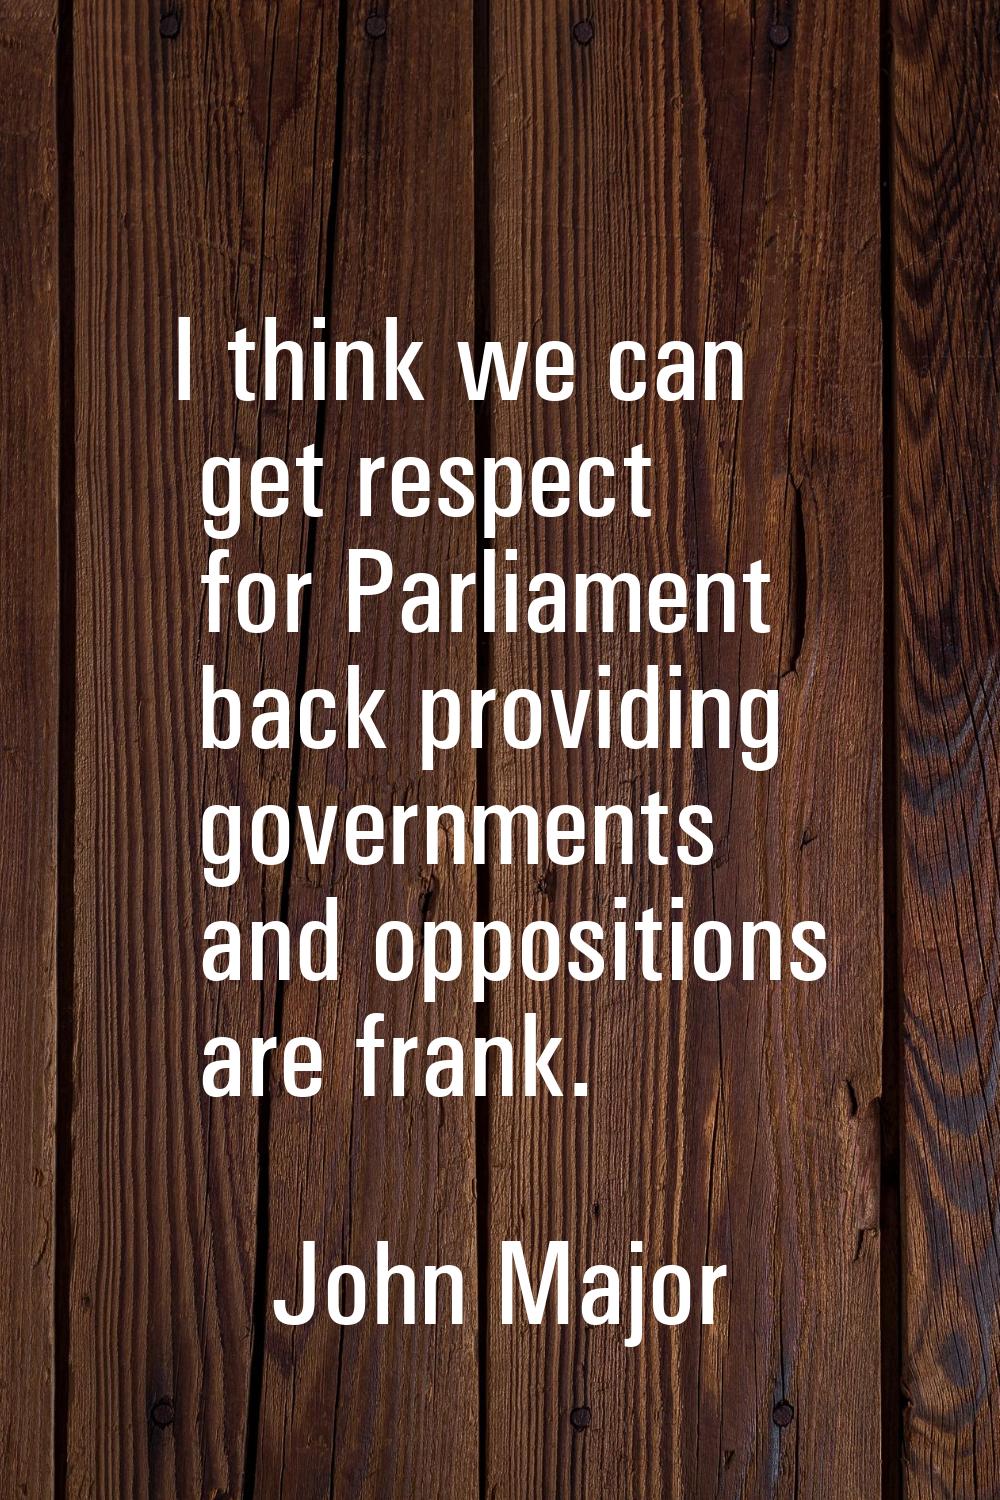 I think we can get respect for Parliament back providing governments and oppositions are frank.